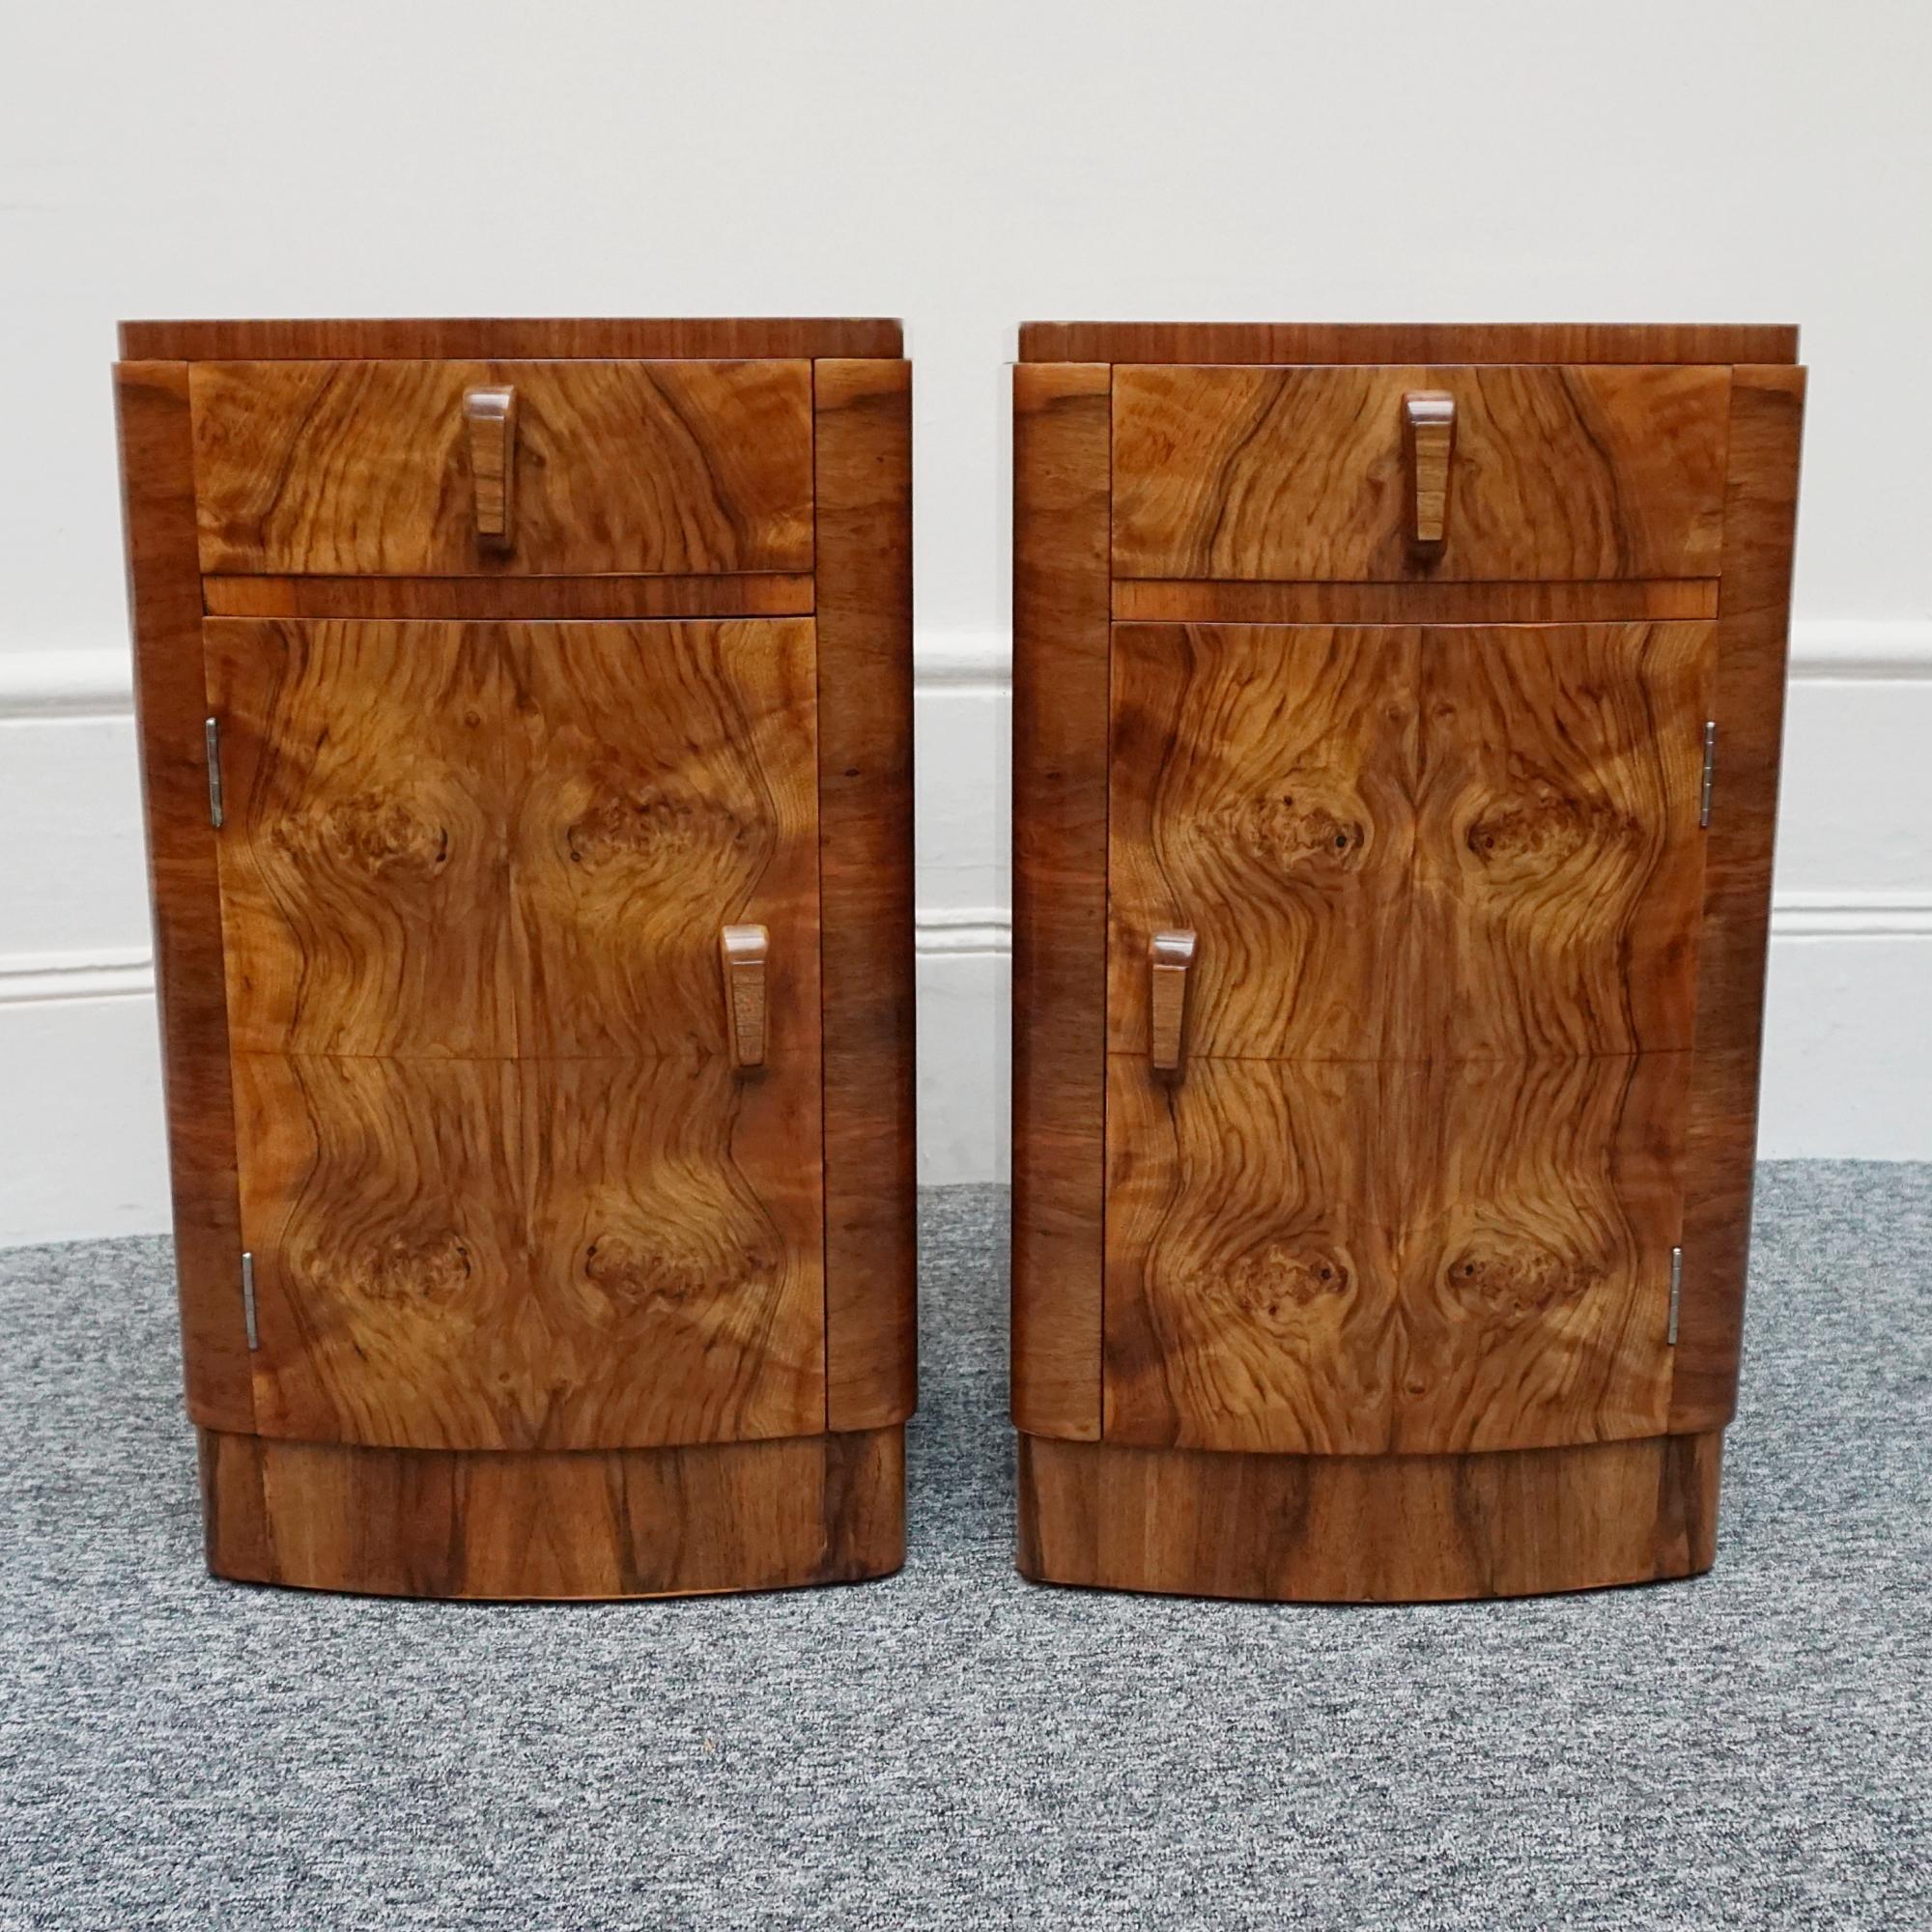 A pair of Art Deco, bedside cabinets in figured walnut with original wooden handles. Drawer to top with shelved cabinet beneath.

Dimensions: H 66cm, W 39cm, D 38cm

Origin: English

Date:  circa 1930

Item No: 2102241

All of our furniture is